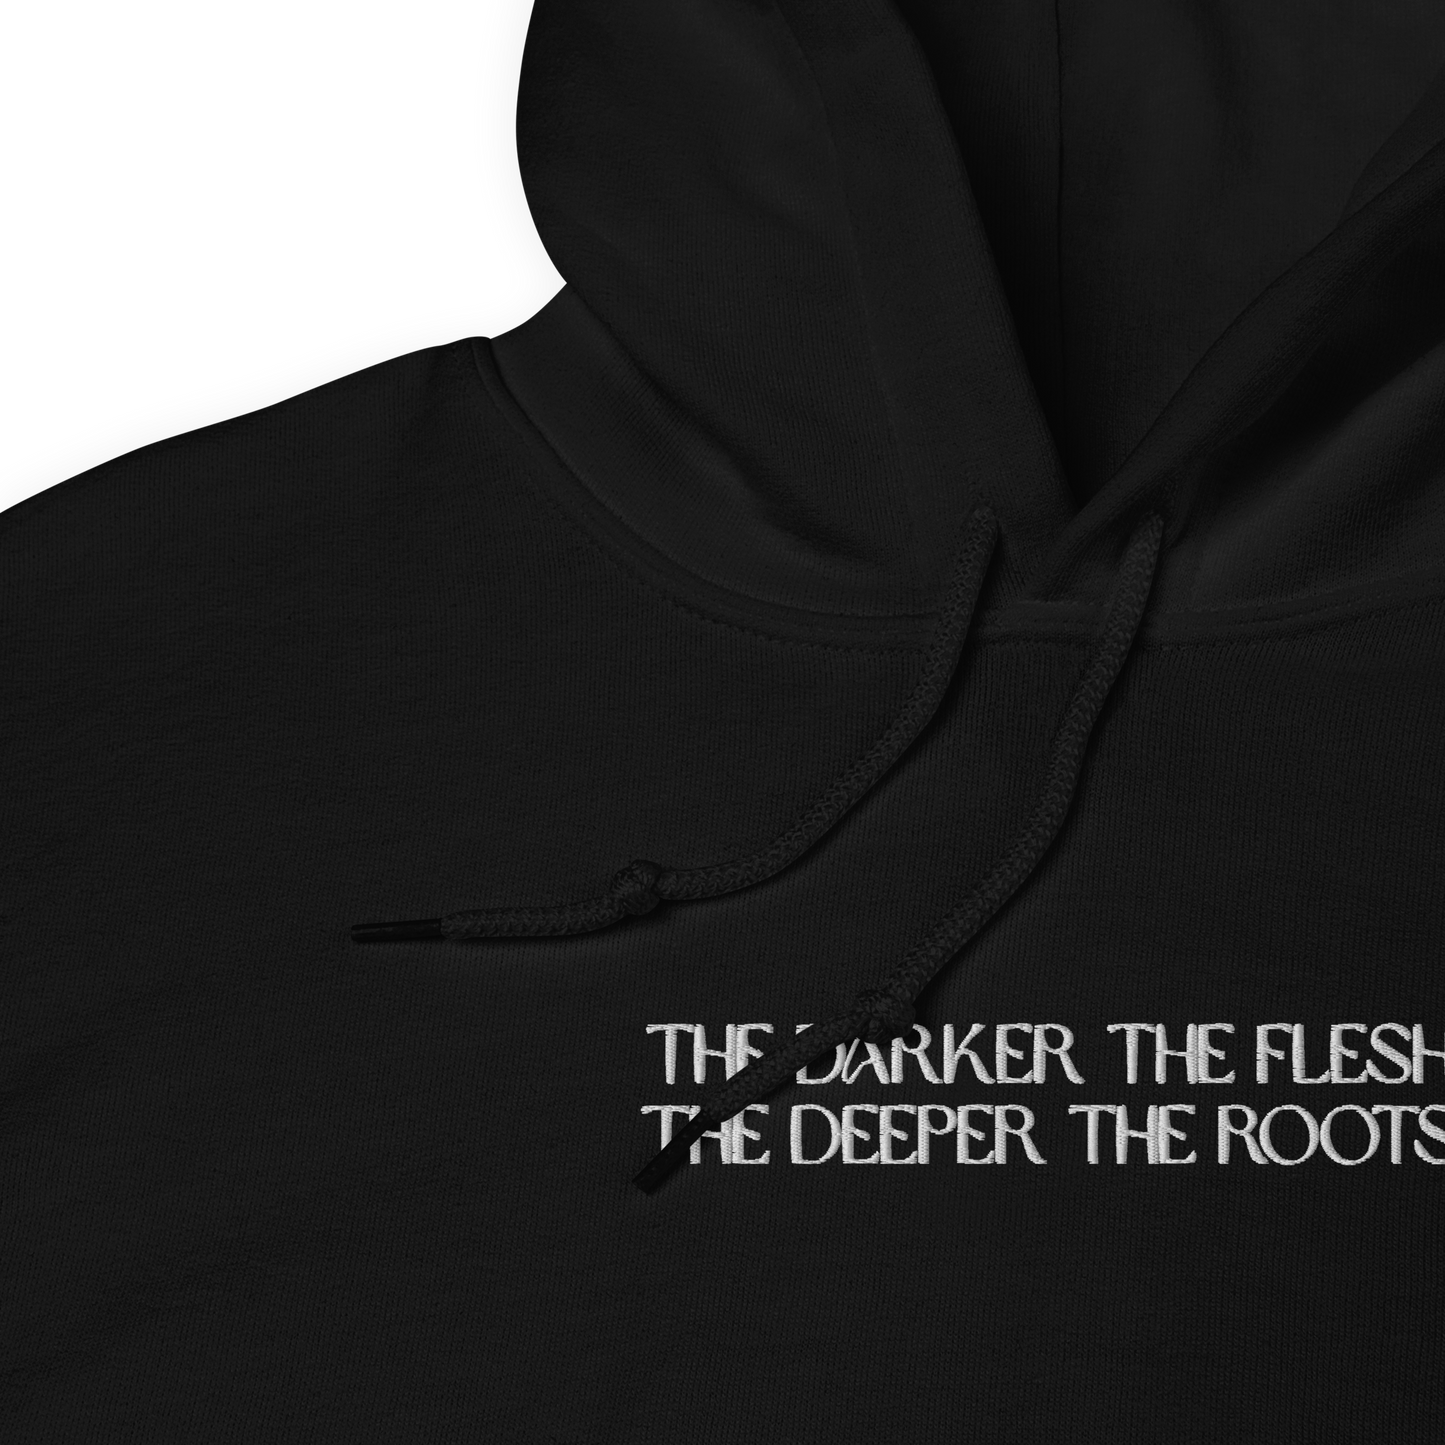 The Darker the Flesh... Embroidered Hoodie